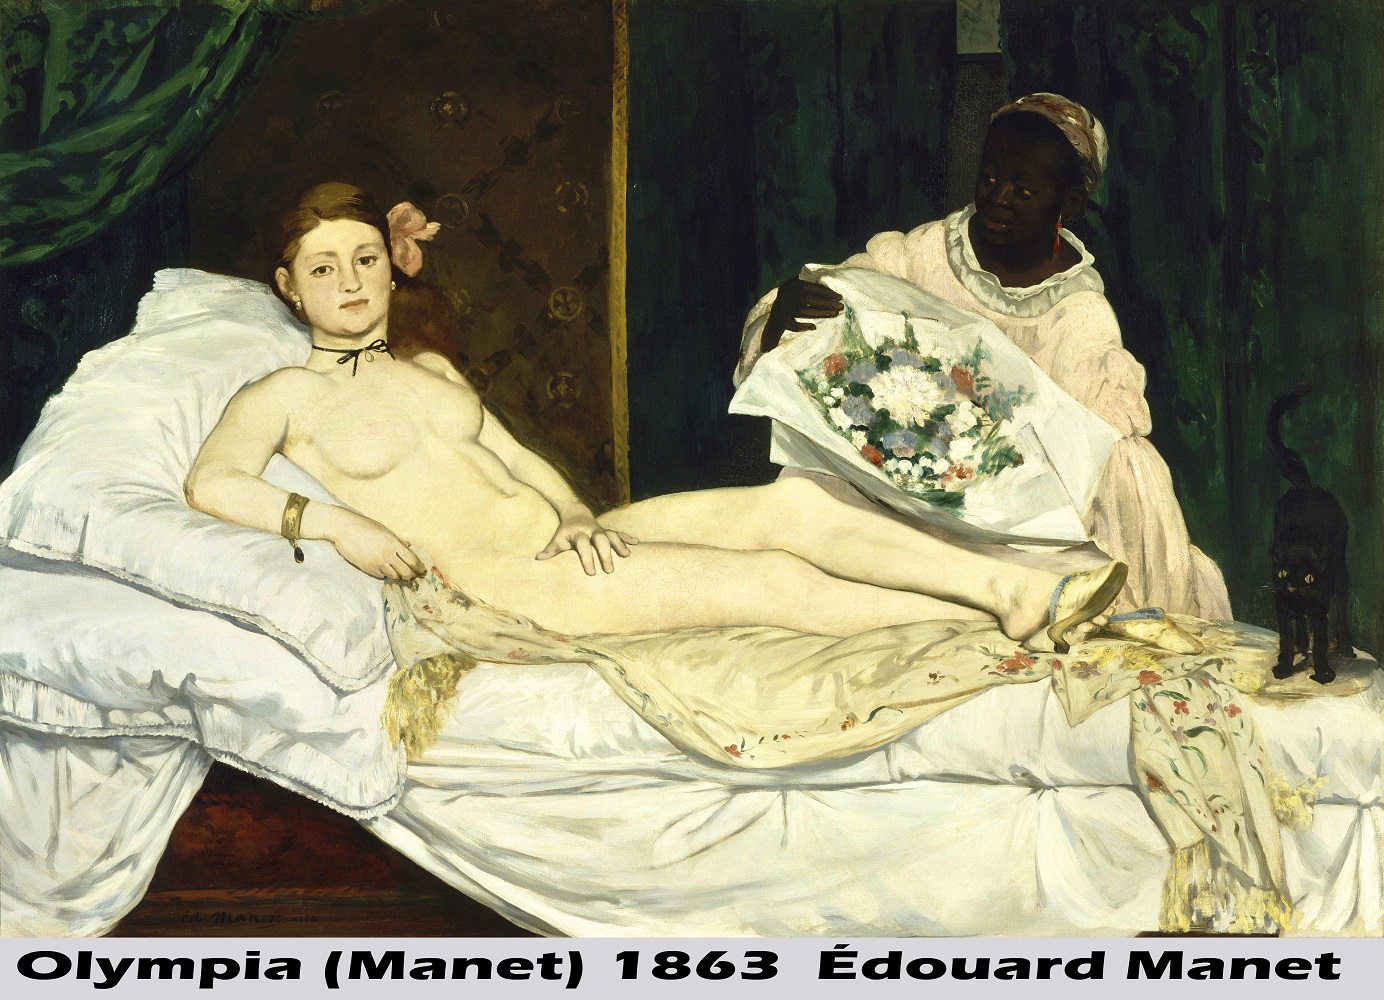 Olympia (Manet) by Édouard Manet